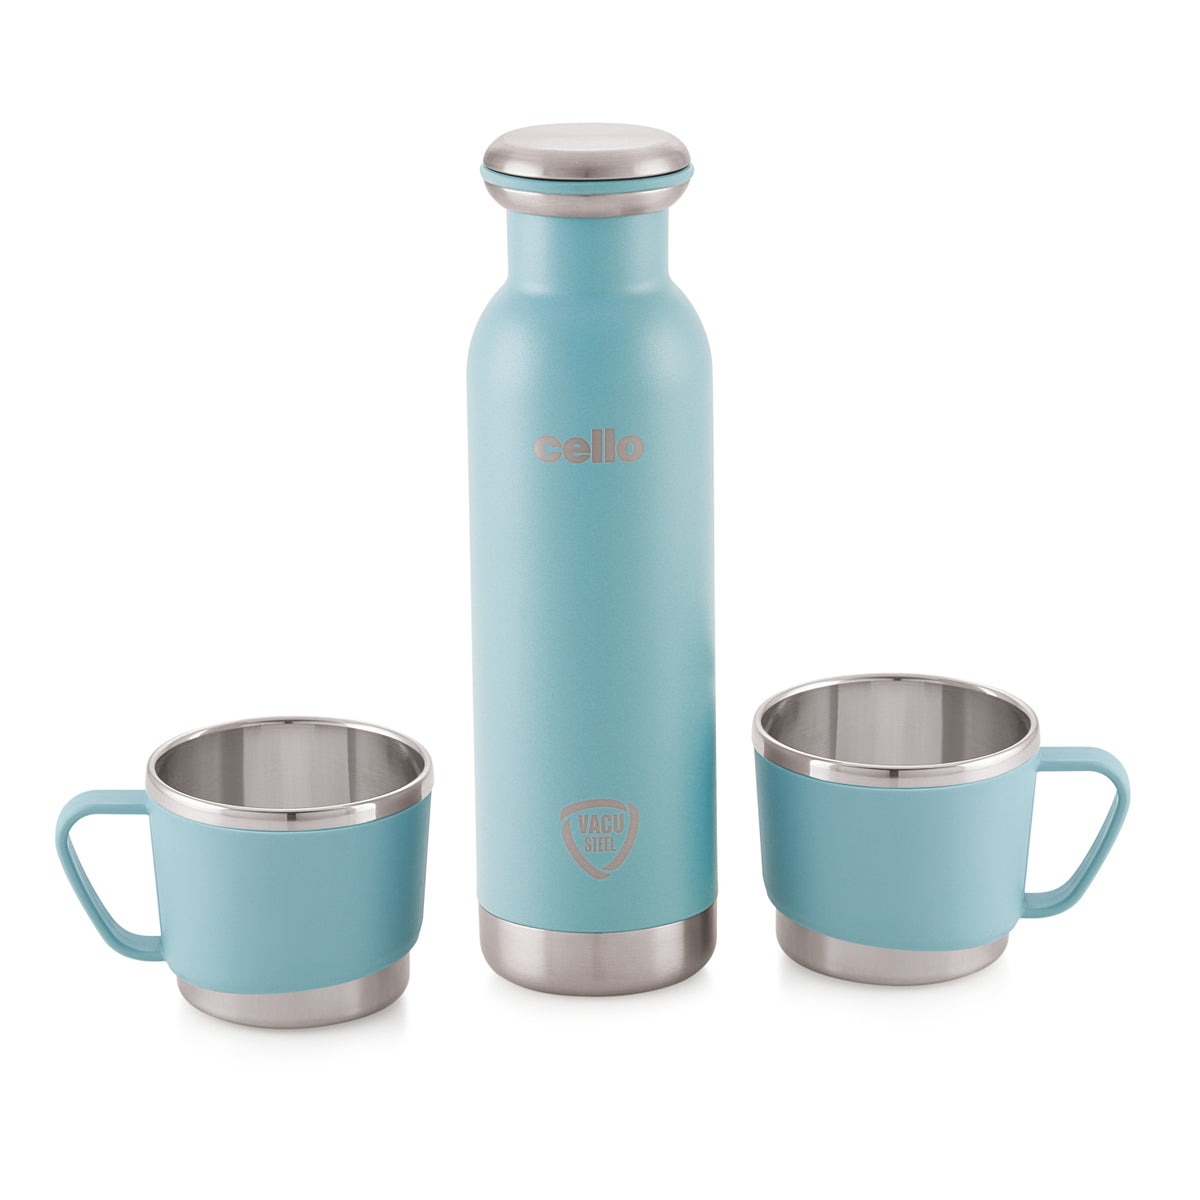 Cheer-Up Vacusteel Flask with Mugs Gift Set, 3 Pieces Blue / 3 Pieces